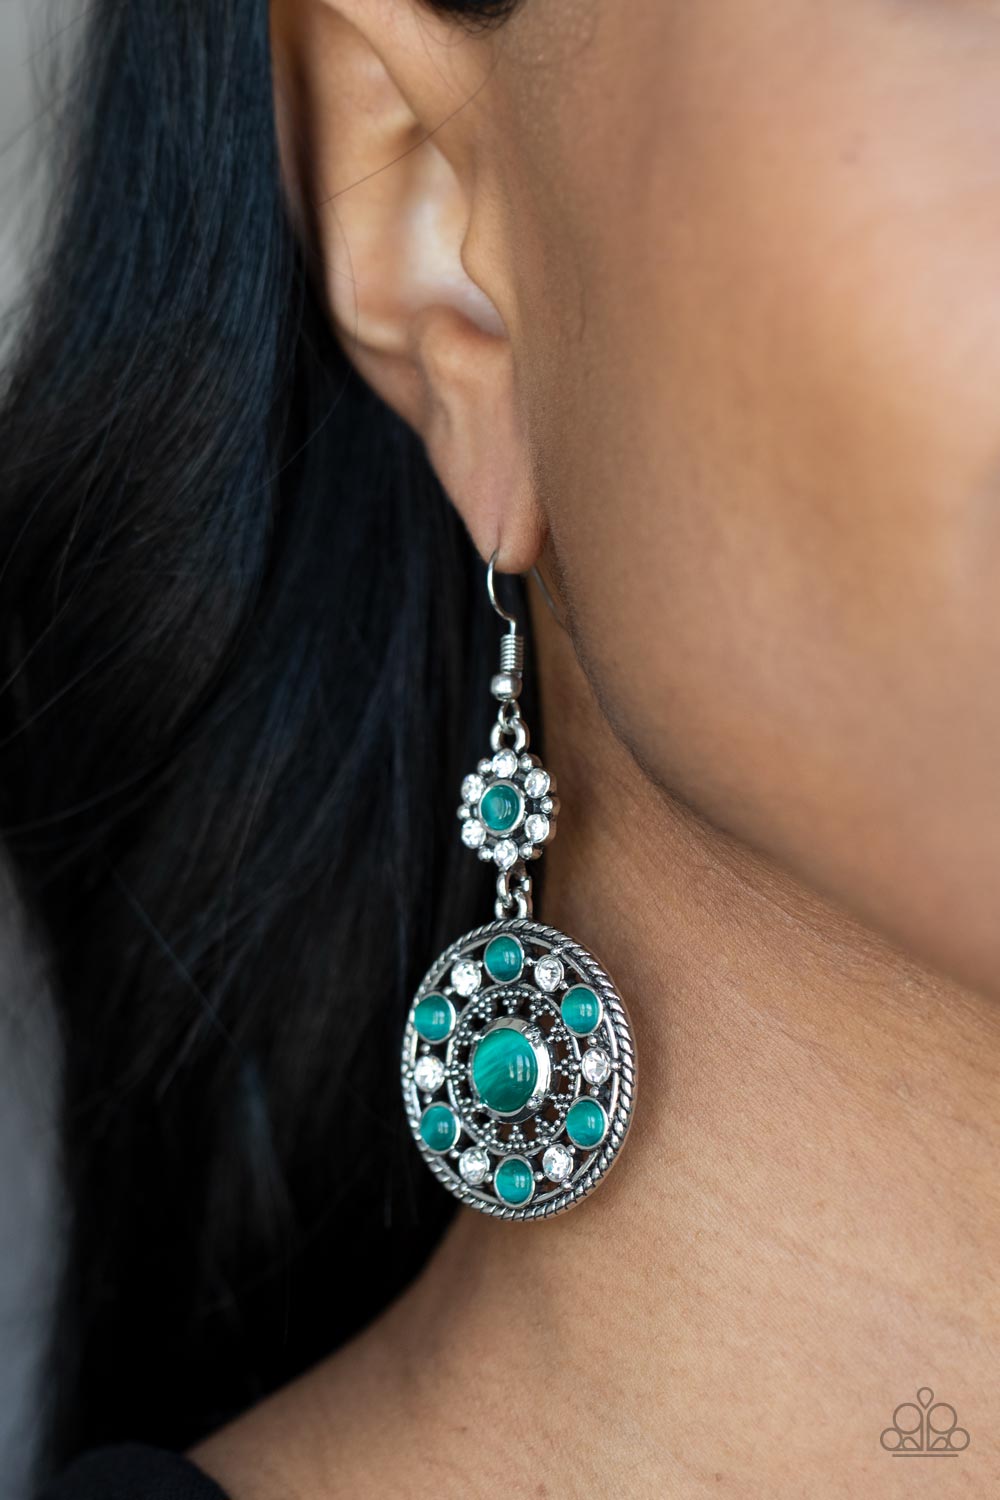 Party at My PALACE Green Cat's Eye Stone Earrings - Paparazzi Accessories- lightbox - CarasShop.com - $5 Jewelry by Cara Jewels